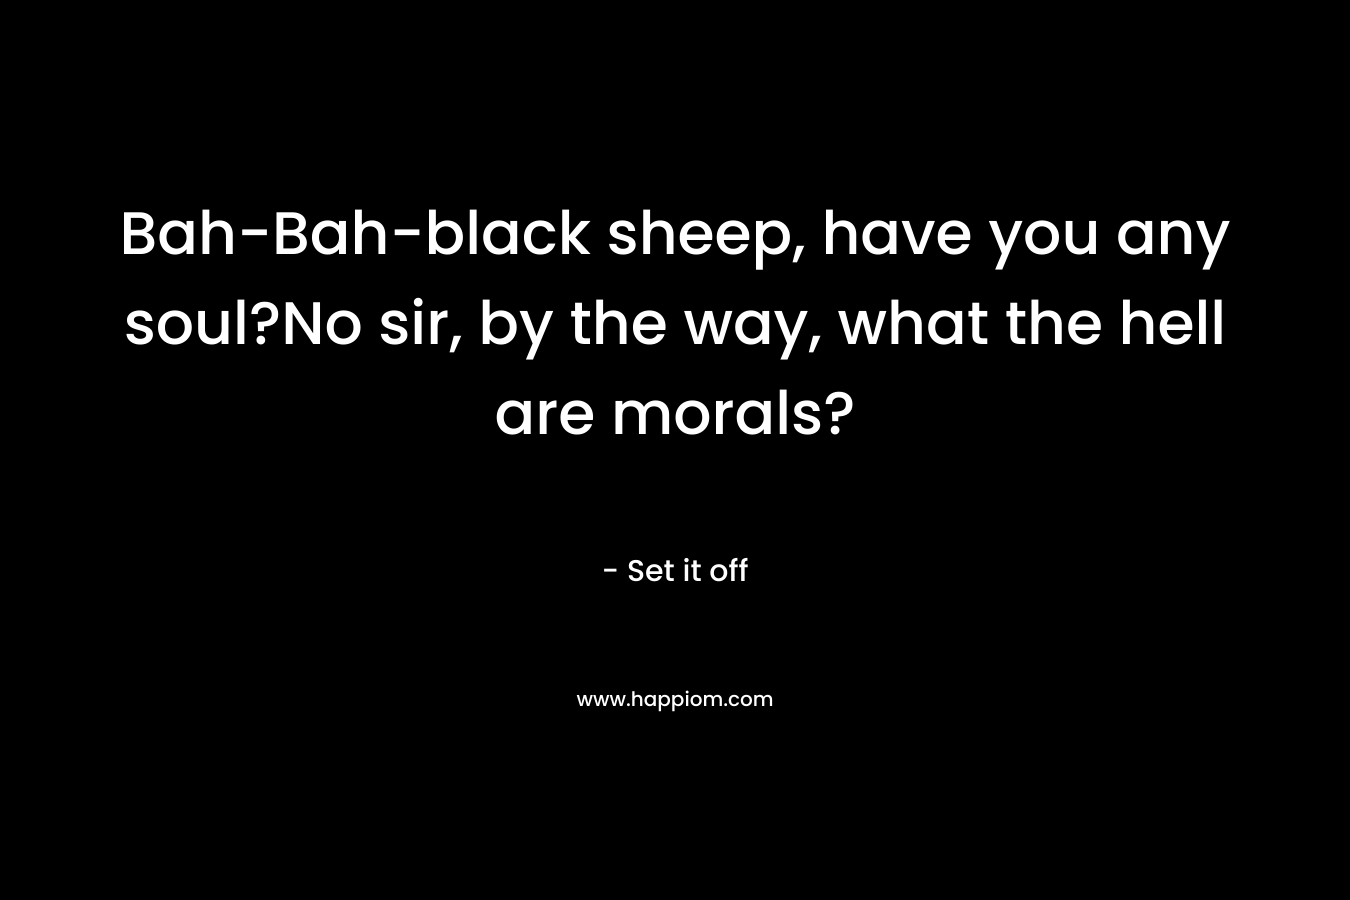 Bah-Bah-black sheep, have you any soul?No sir, by the way, what the hell are morals? – Set it off